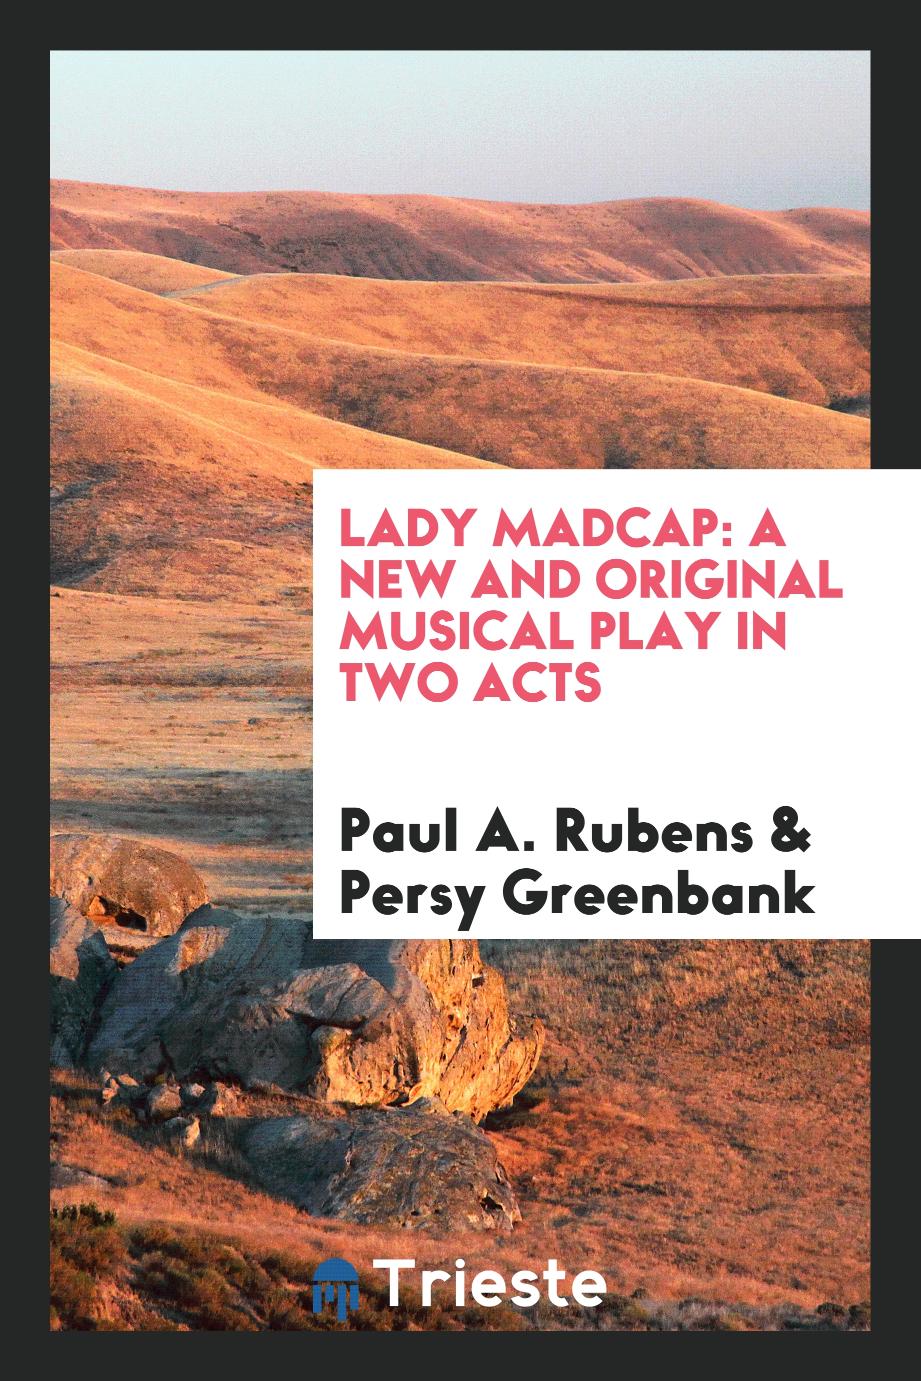 Lady Madcap: A New and Original Musical Play in Two Acts